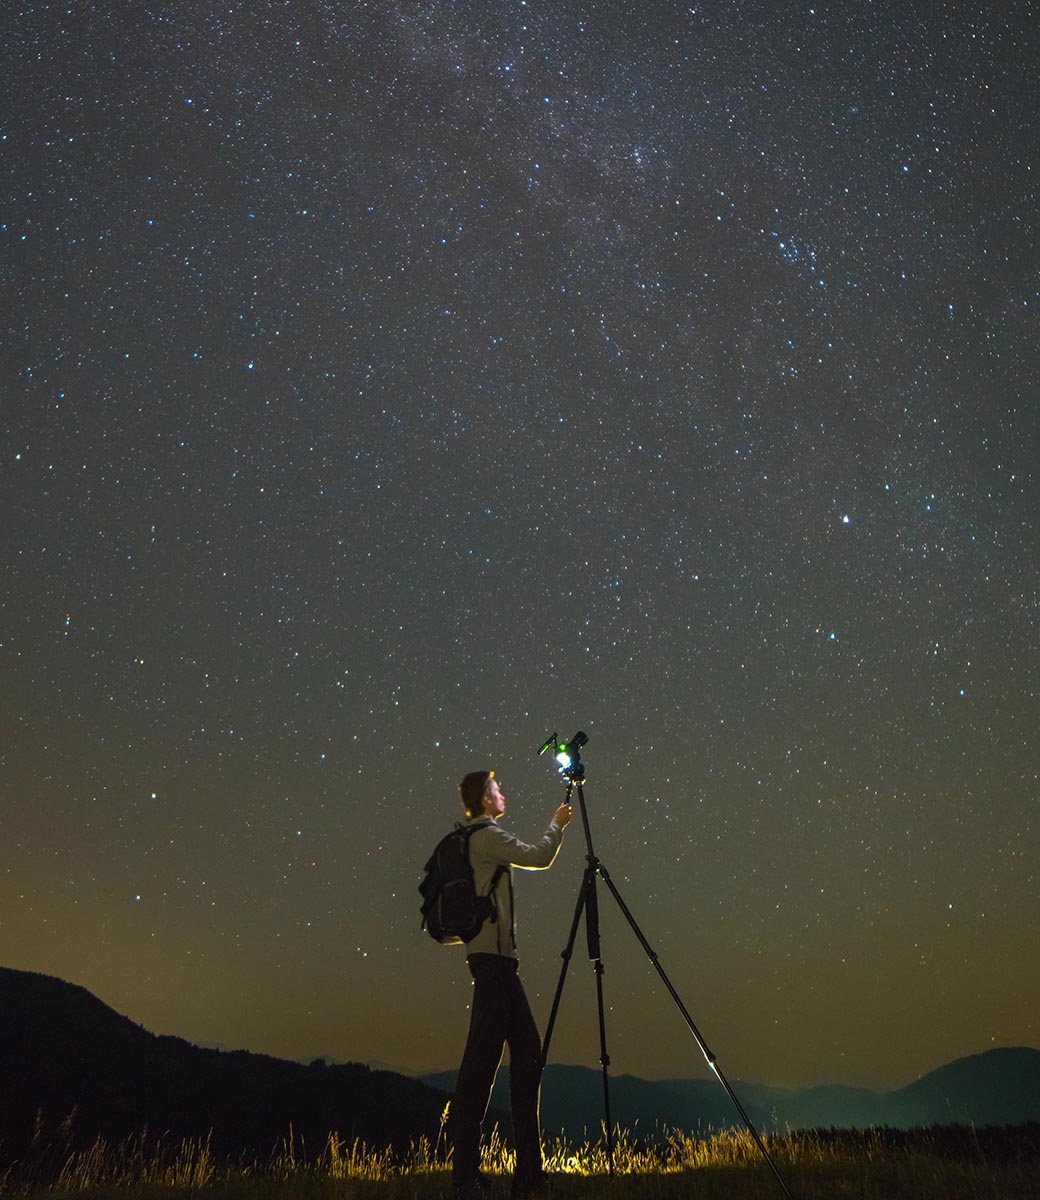 the-man-with-a-camera-stand-on-the-starry-sky-back-2022-10-10-14-44-07-utc-copy3.jpg